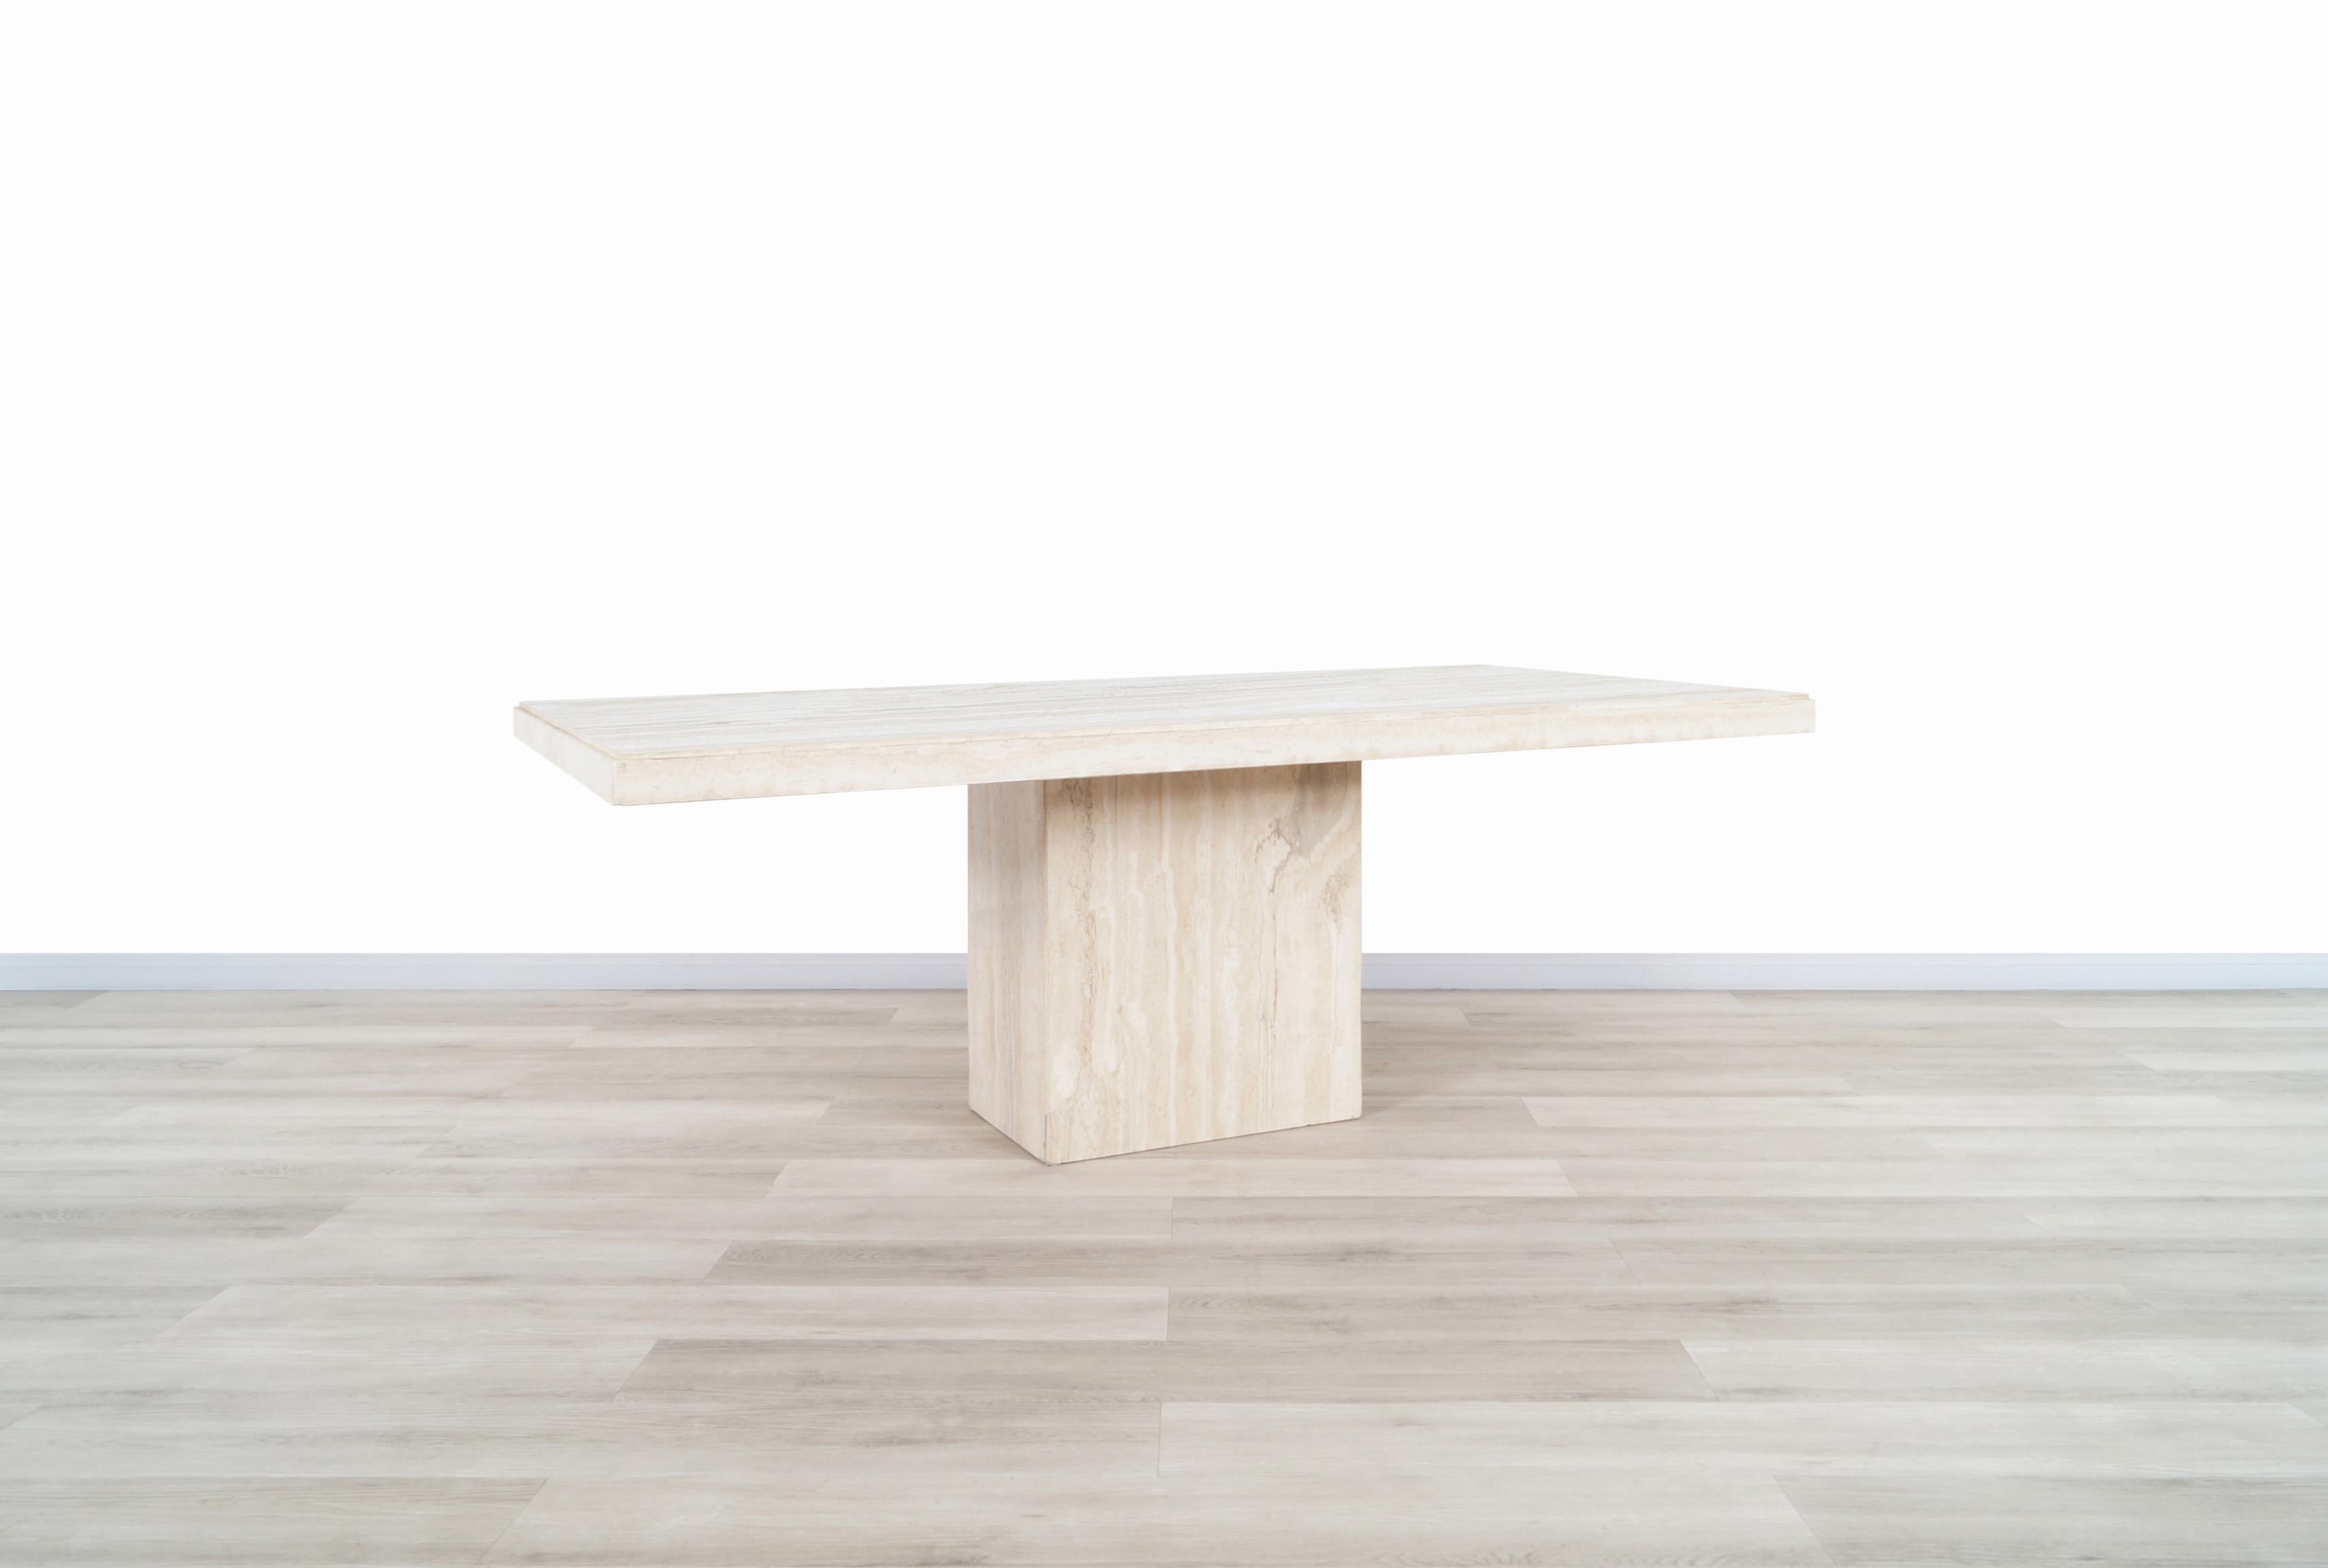 Stunning vintage modernist travertine dining table manufactured in Italy, circa 1970s. This table features a gorgeous rectangular travertine top that sits over an extremely sturdy base and is complemented by the natural minerals of the travertine